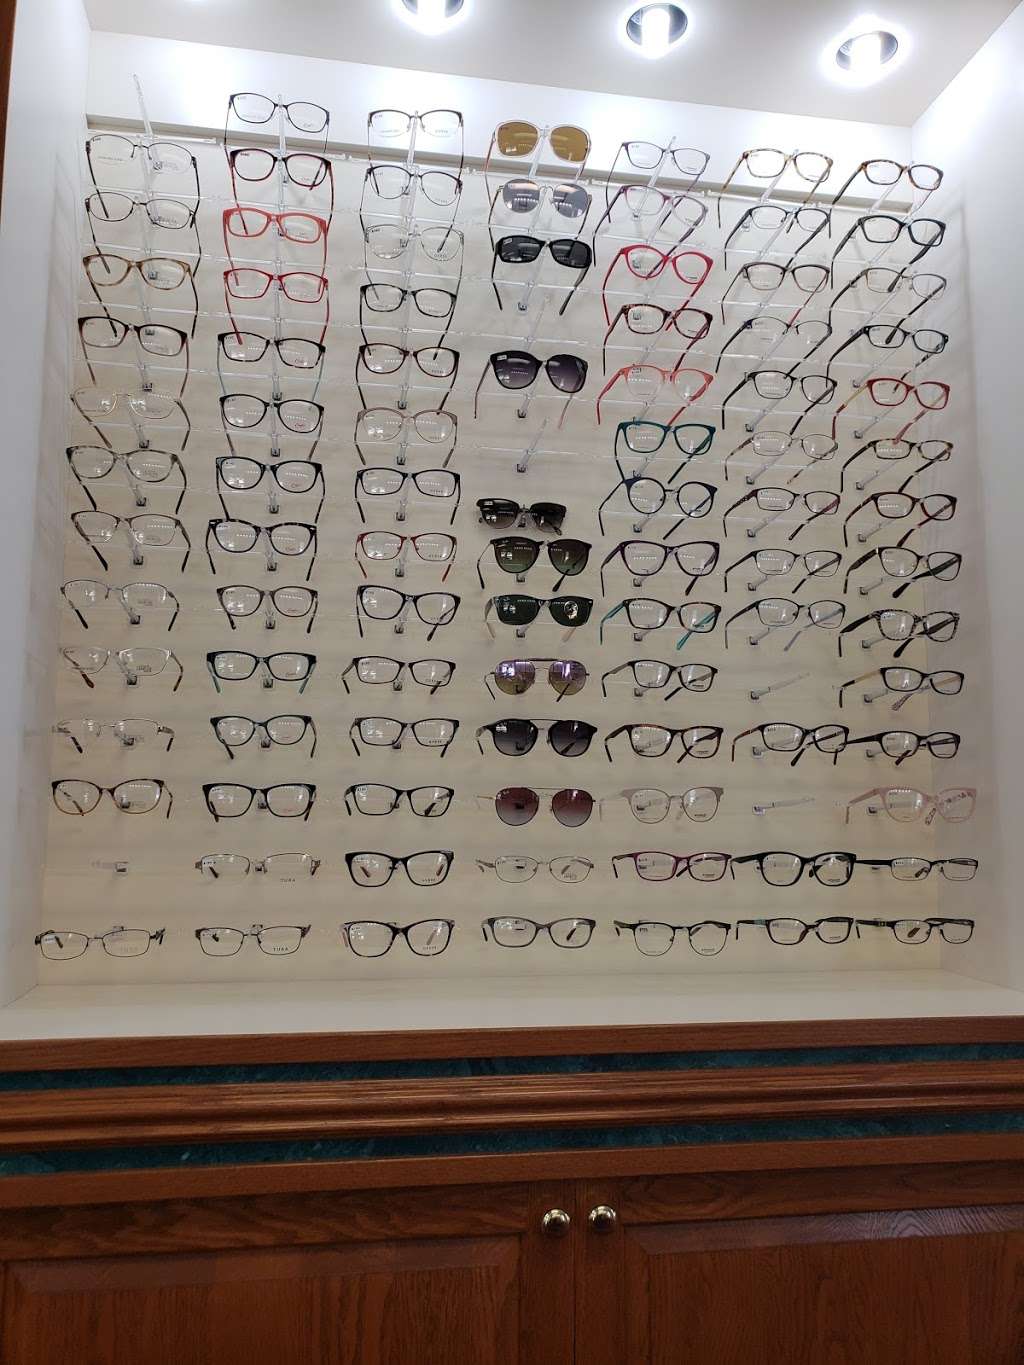 Norman and Miller Eyecare | 3888 Union St, Lafayette, IN 47905, USA | Phone: (765) 447-5413